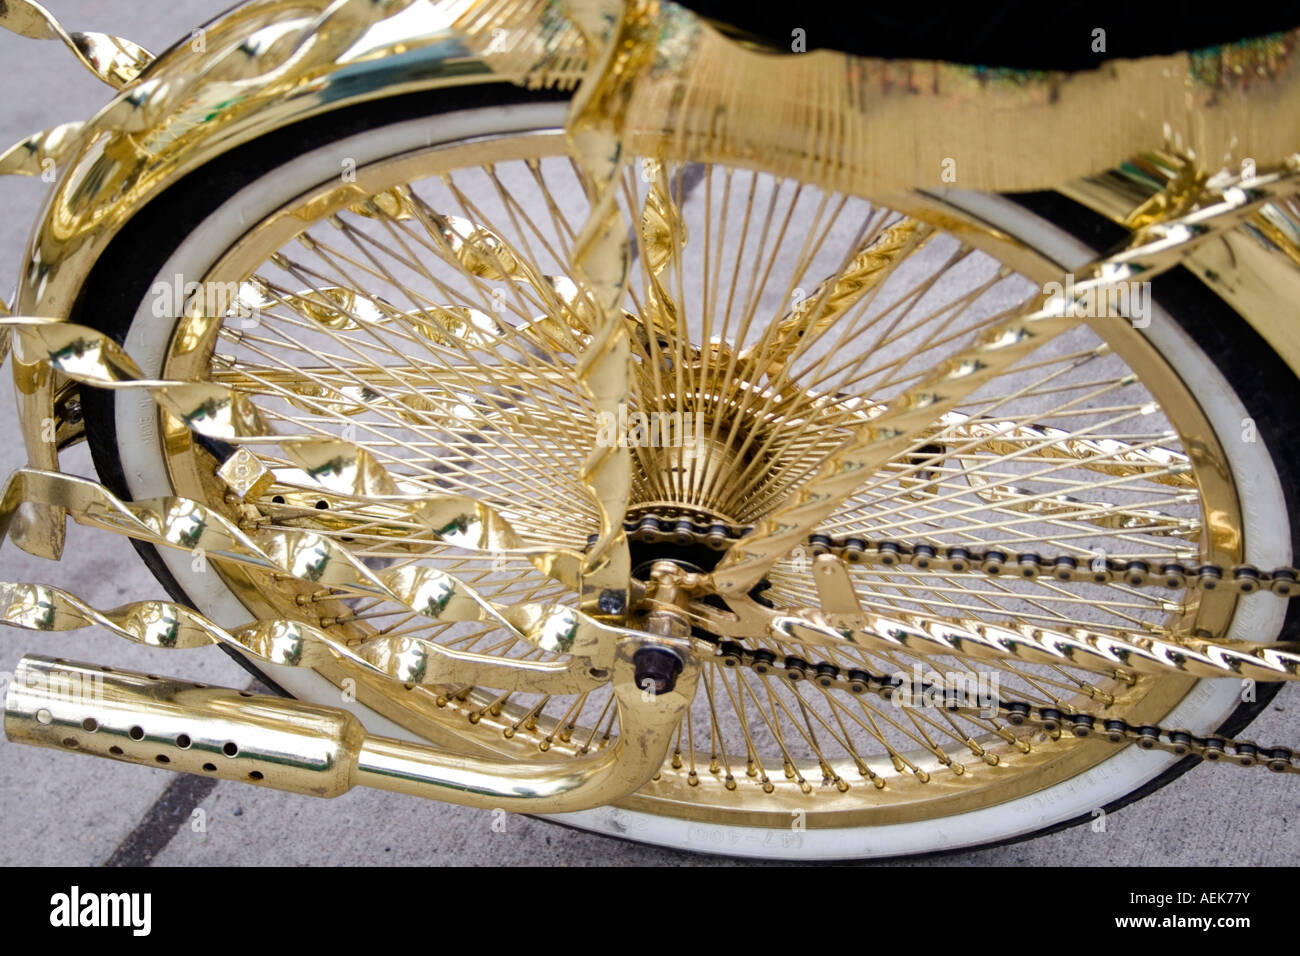 The gold plated bicycle -Fotos und -Bildmaterial in hoher Auflösung – Alamy